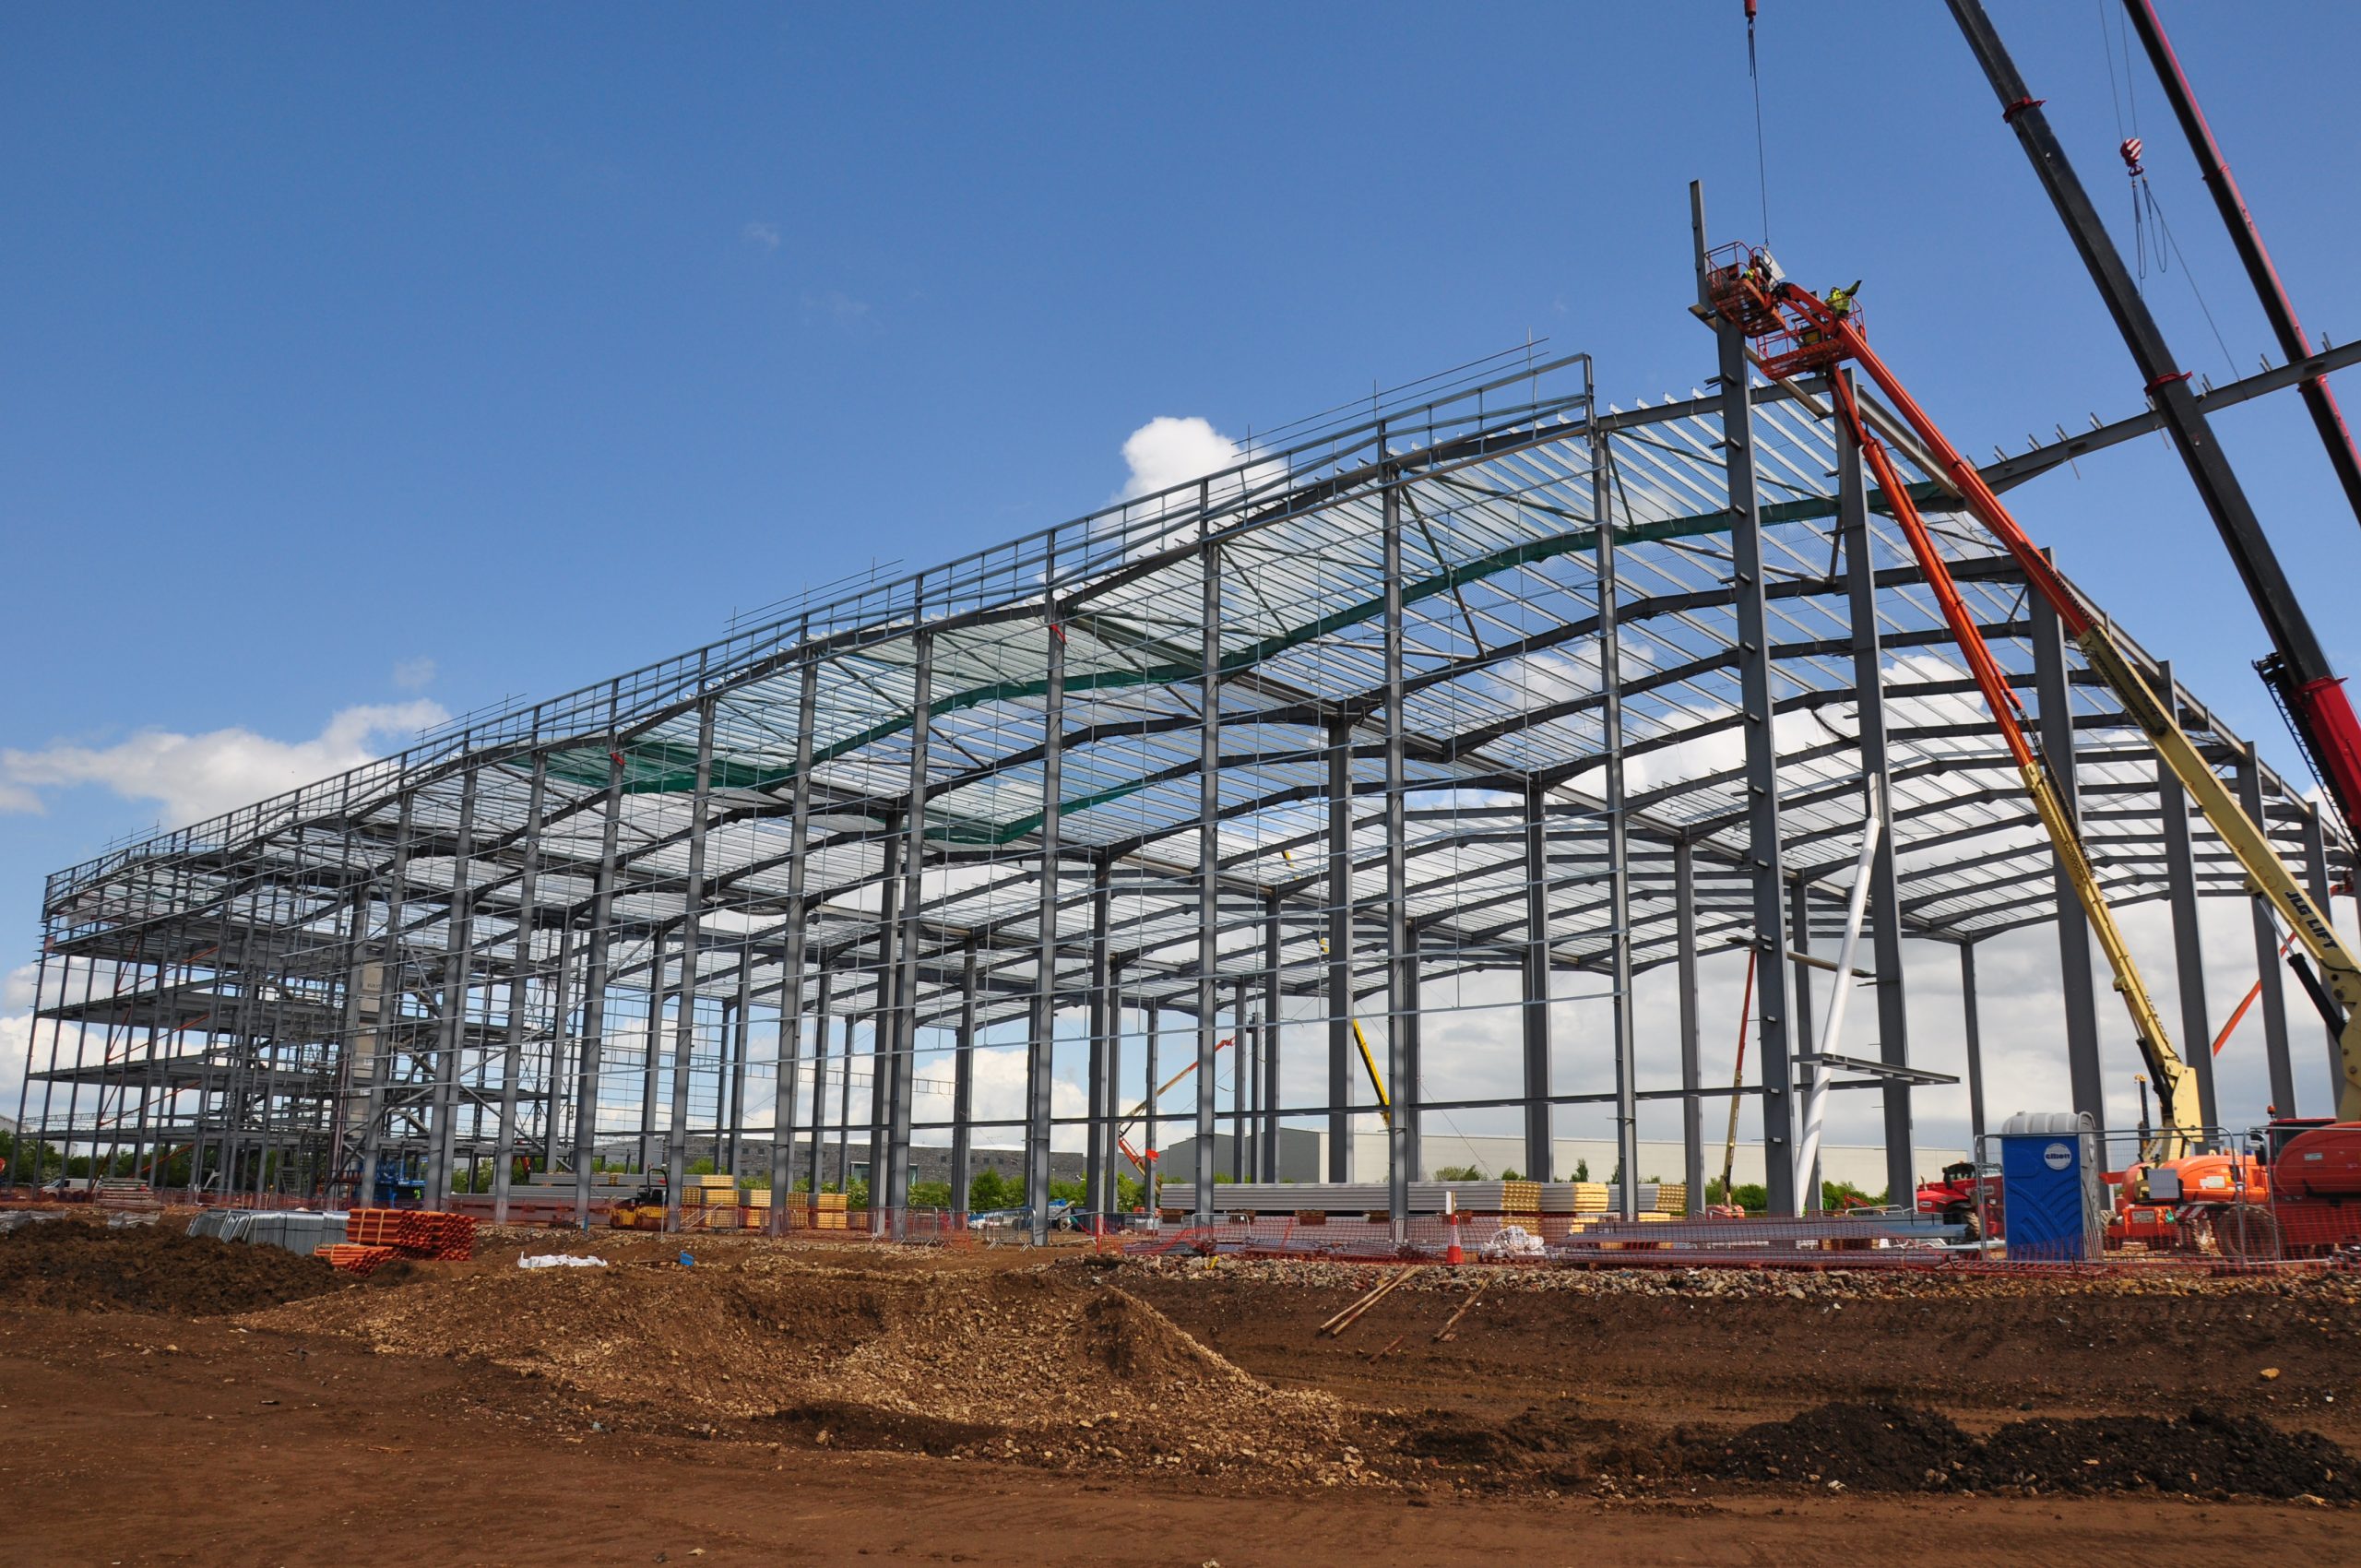 Next distribution centre in Doncaster